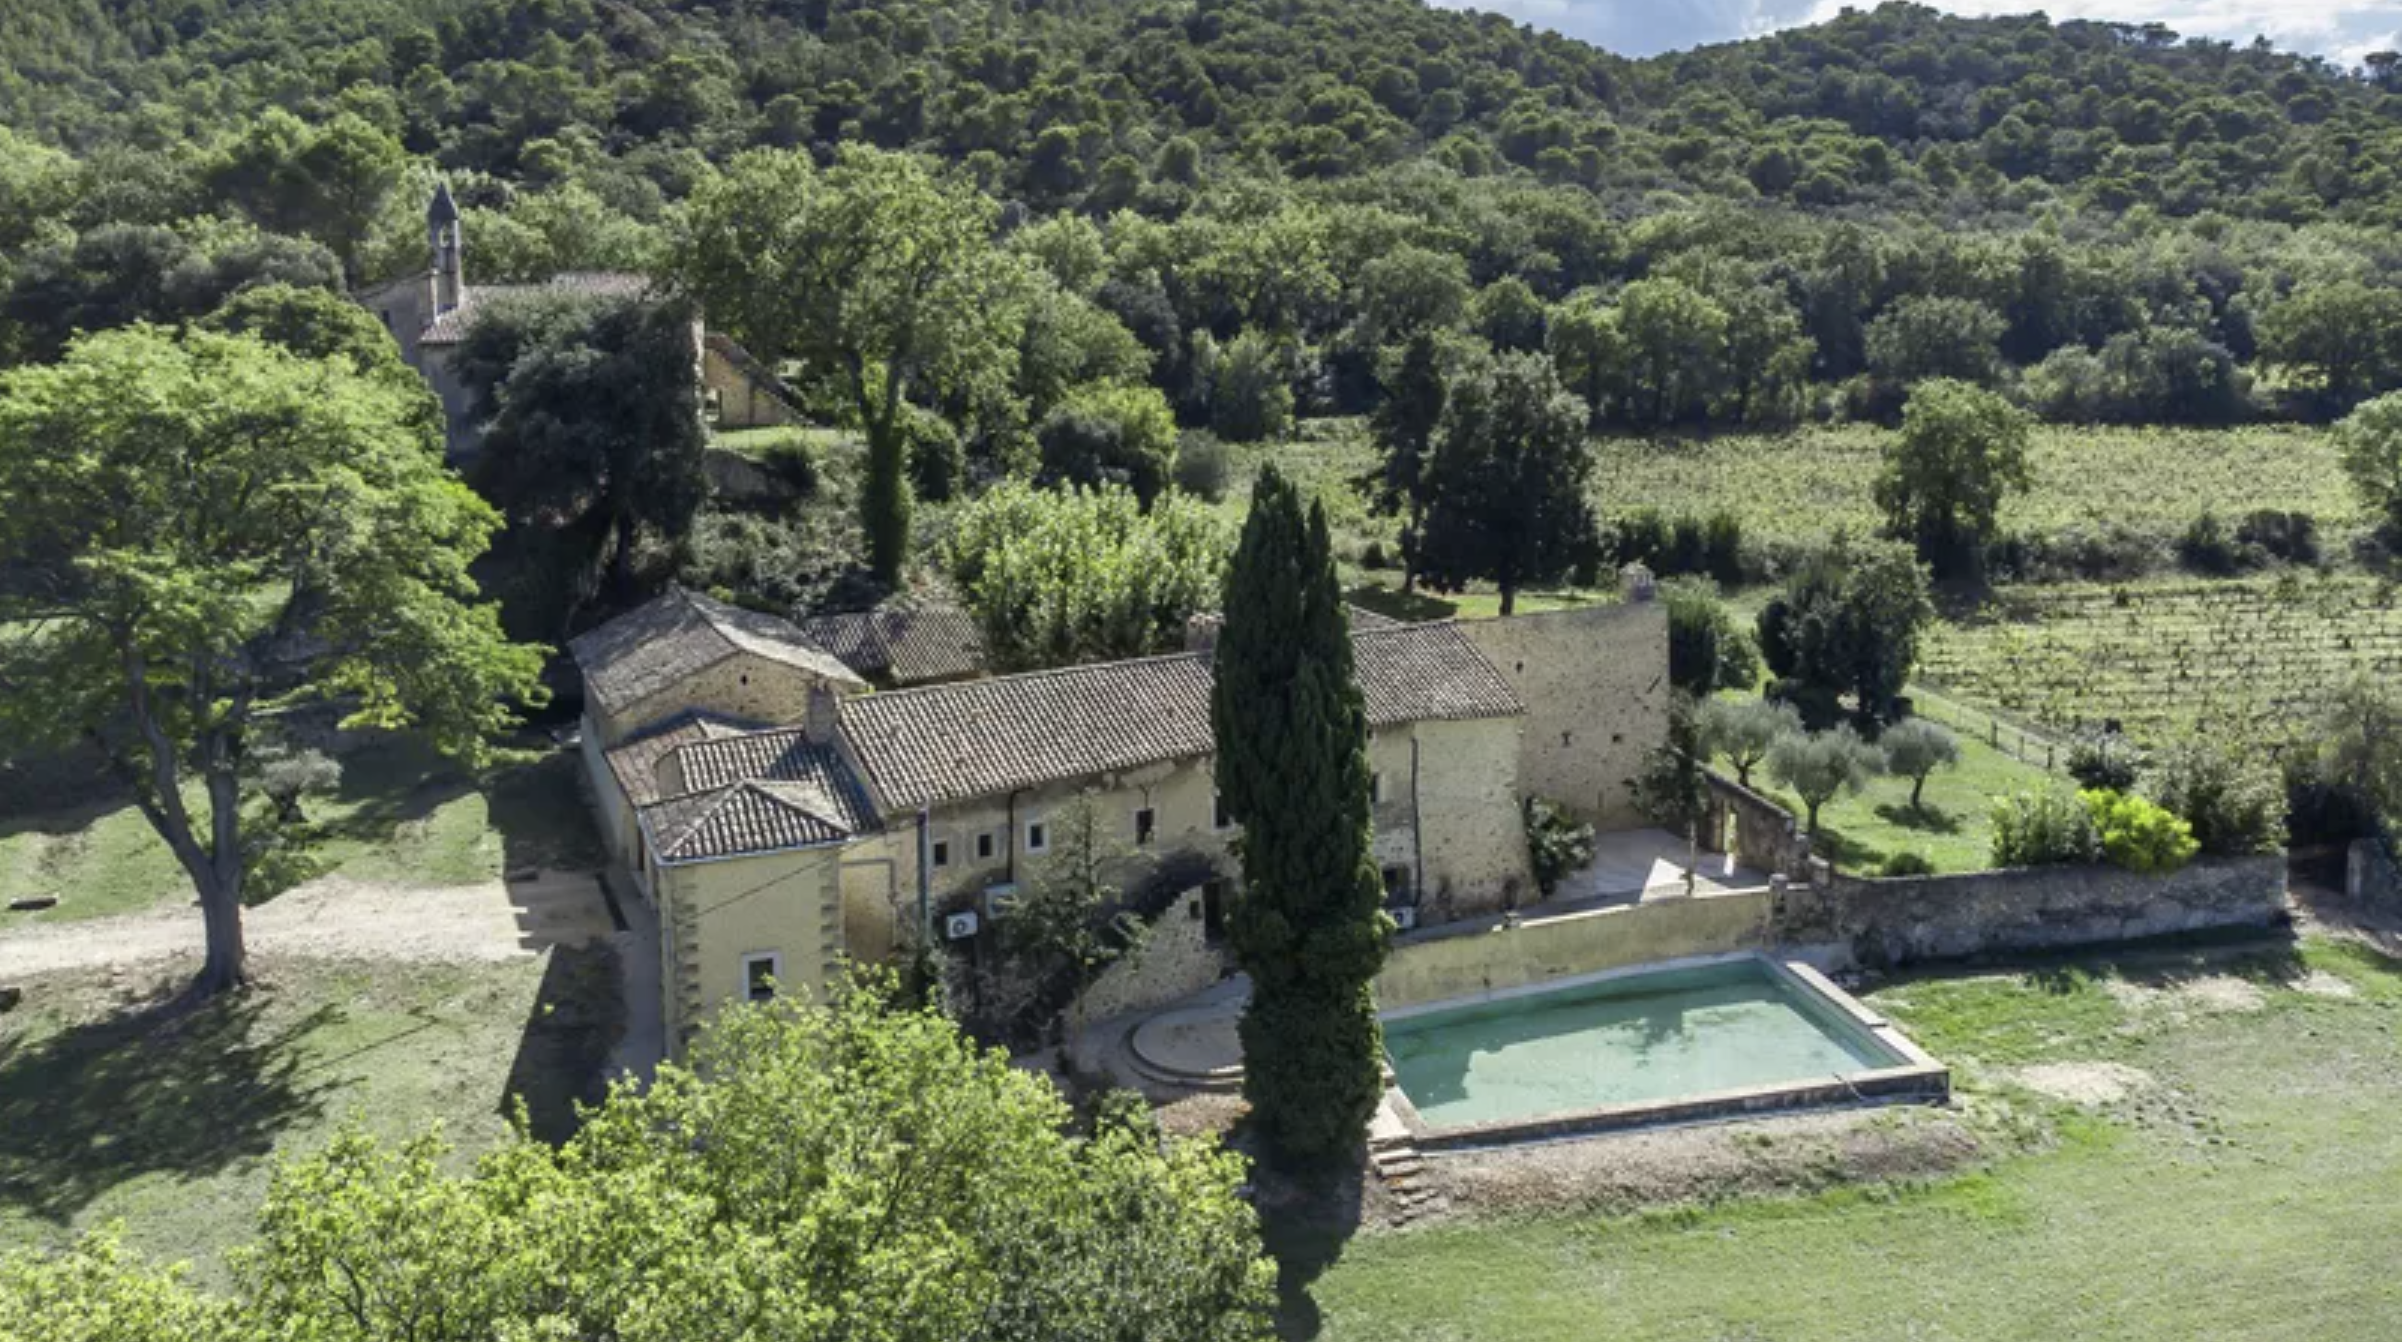 Francis+York+Renovated Historic Residence and 98 Acre Estate in Provence, France  00005.png